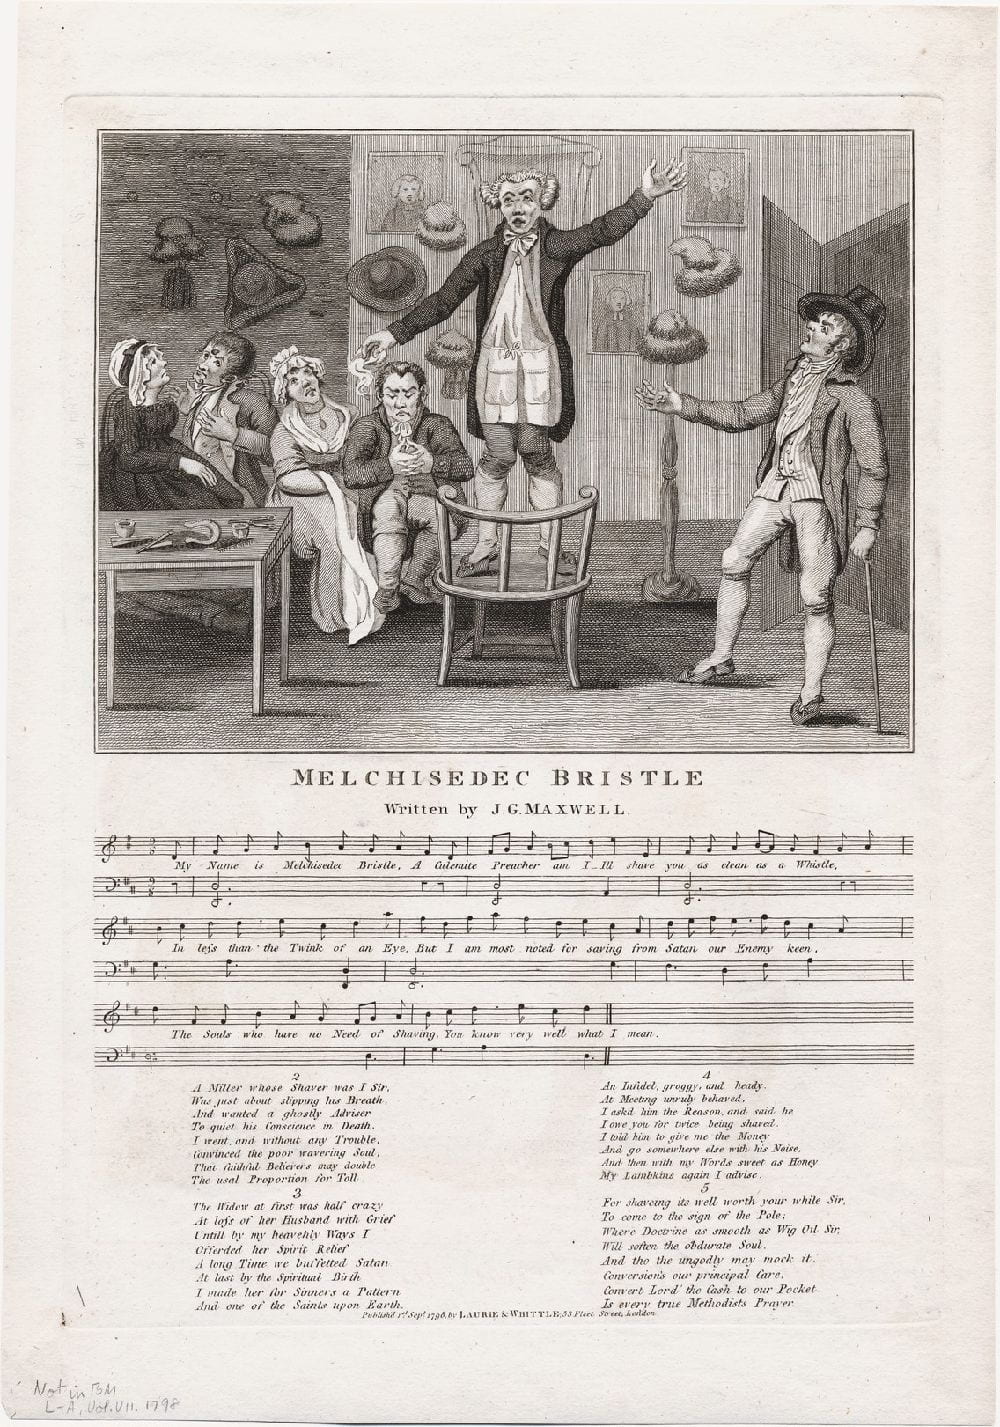 Song in five stanzas, printed below title and below image of a man standing on a chair, one arm raised. Two couples sit on the left of the composition, and a man enters through the doorway on the right.